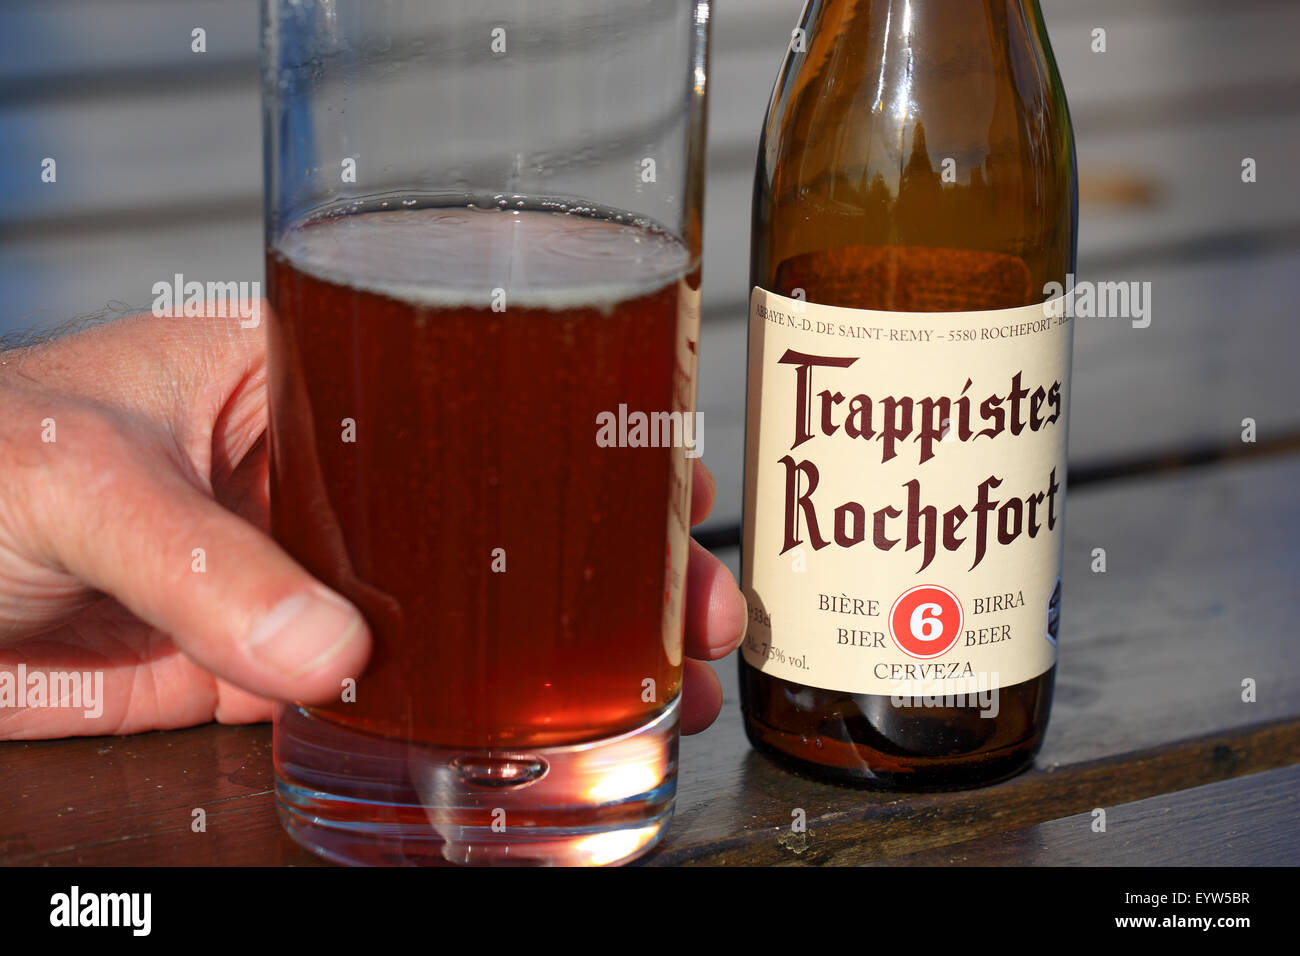 Hand of a man lifting a glass of Belgian beer Trappistes Rochefort Stock Photo